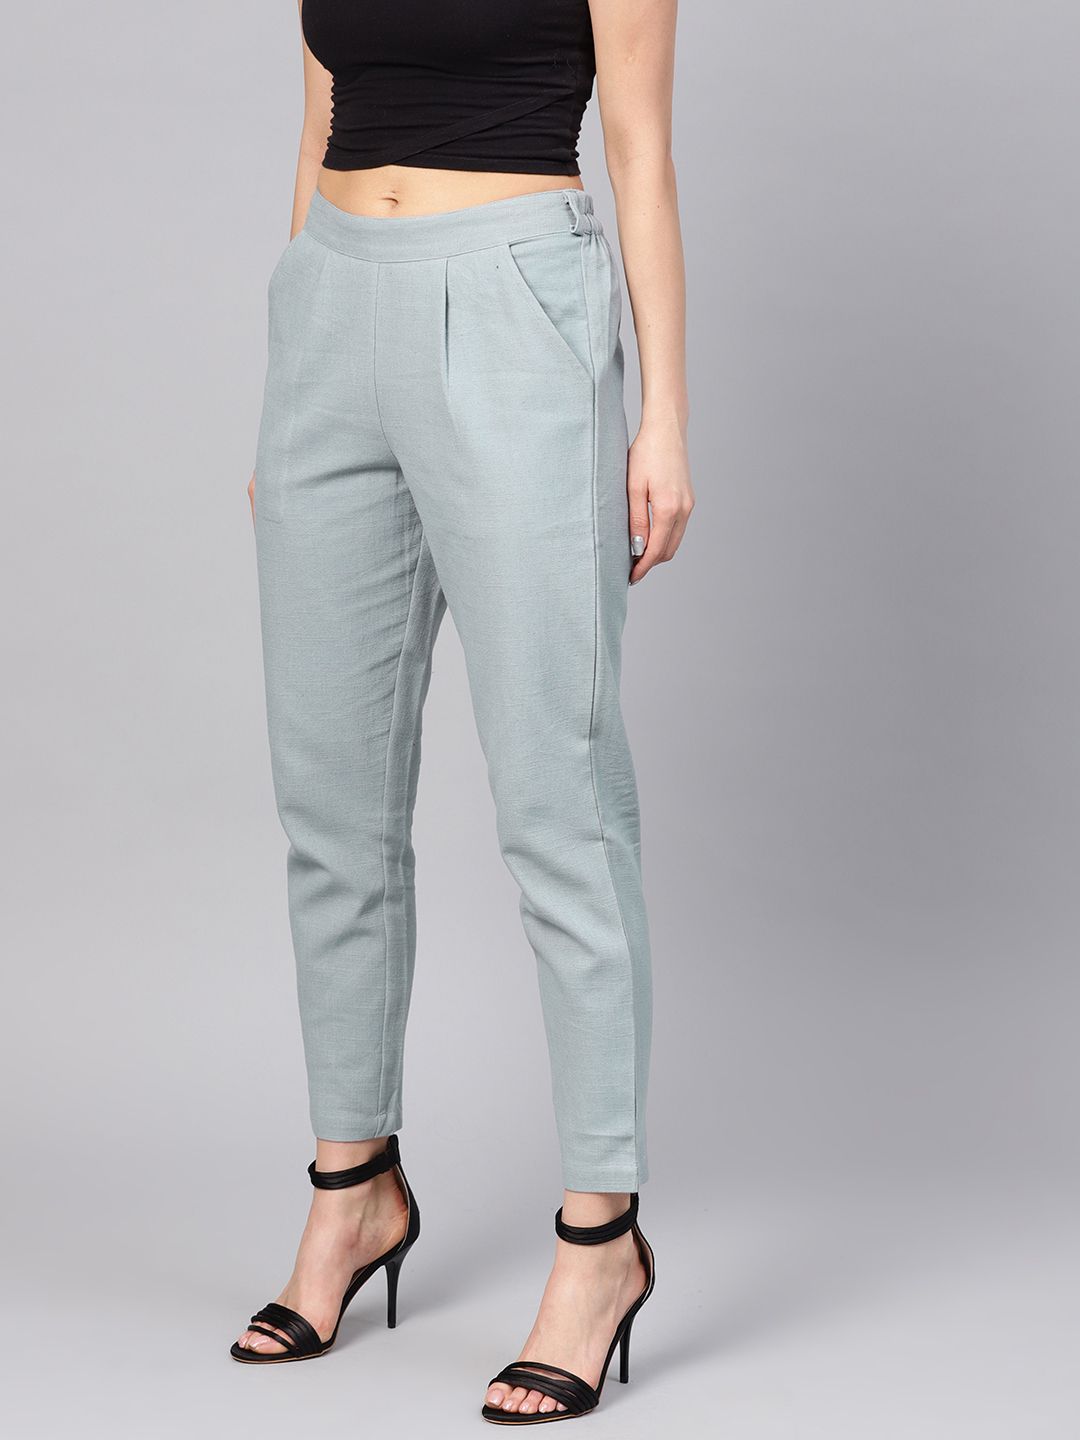 Get slim fit trousers for women